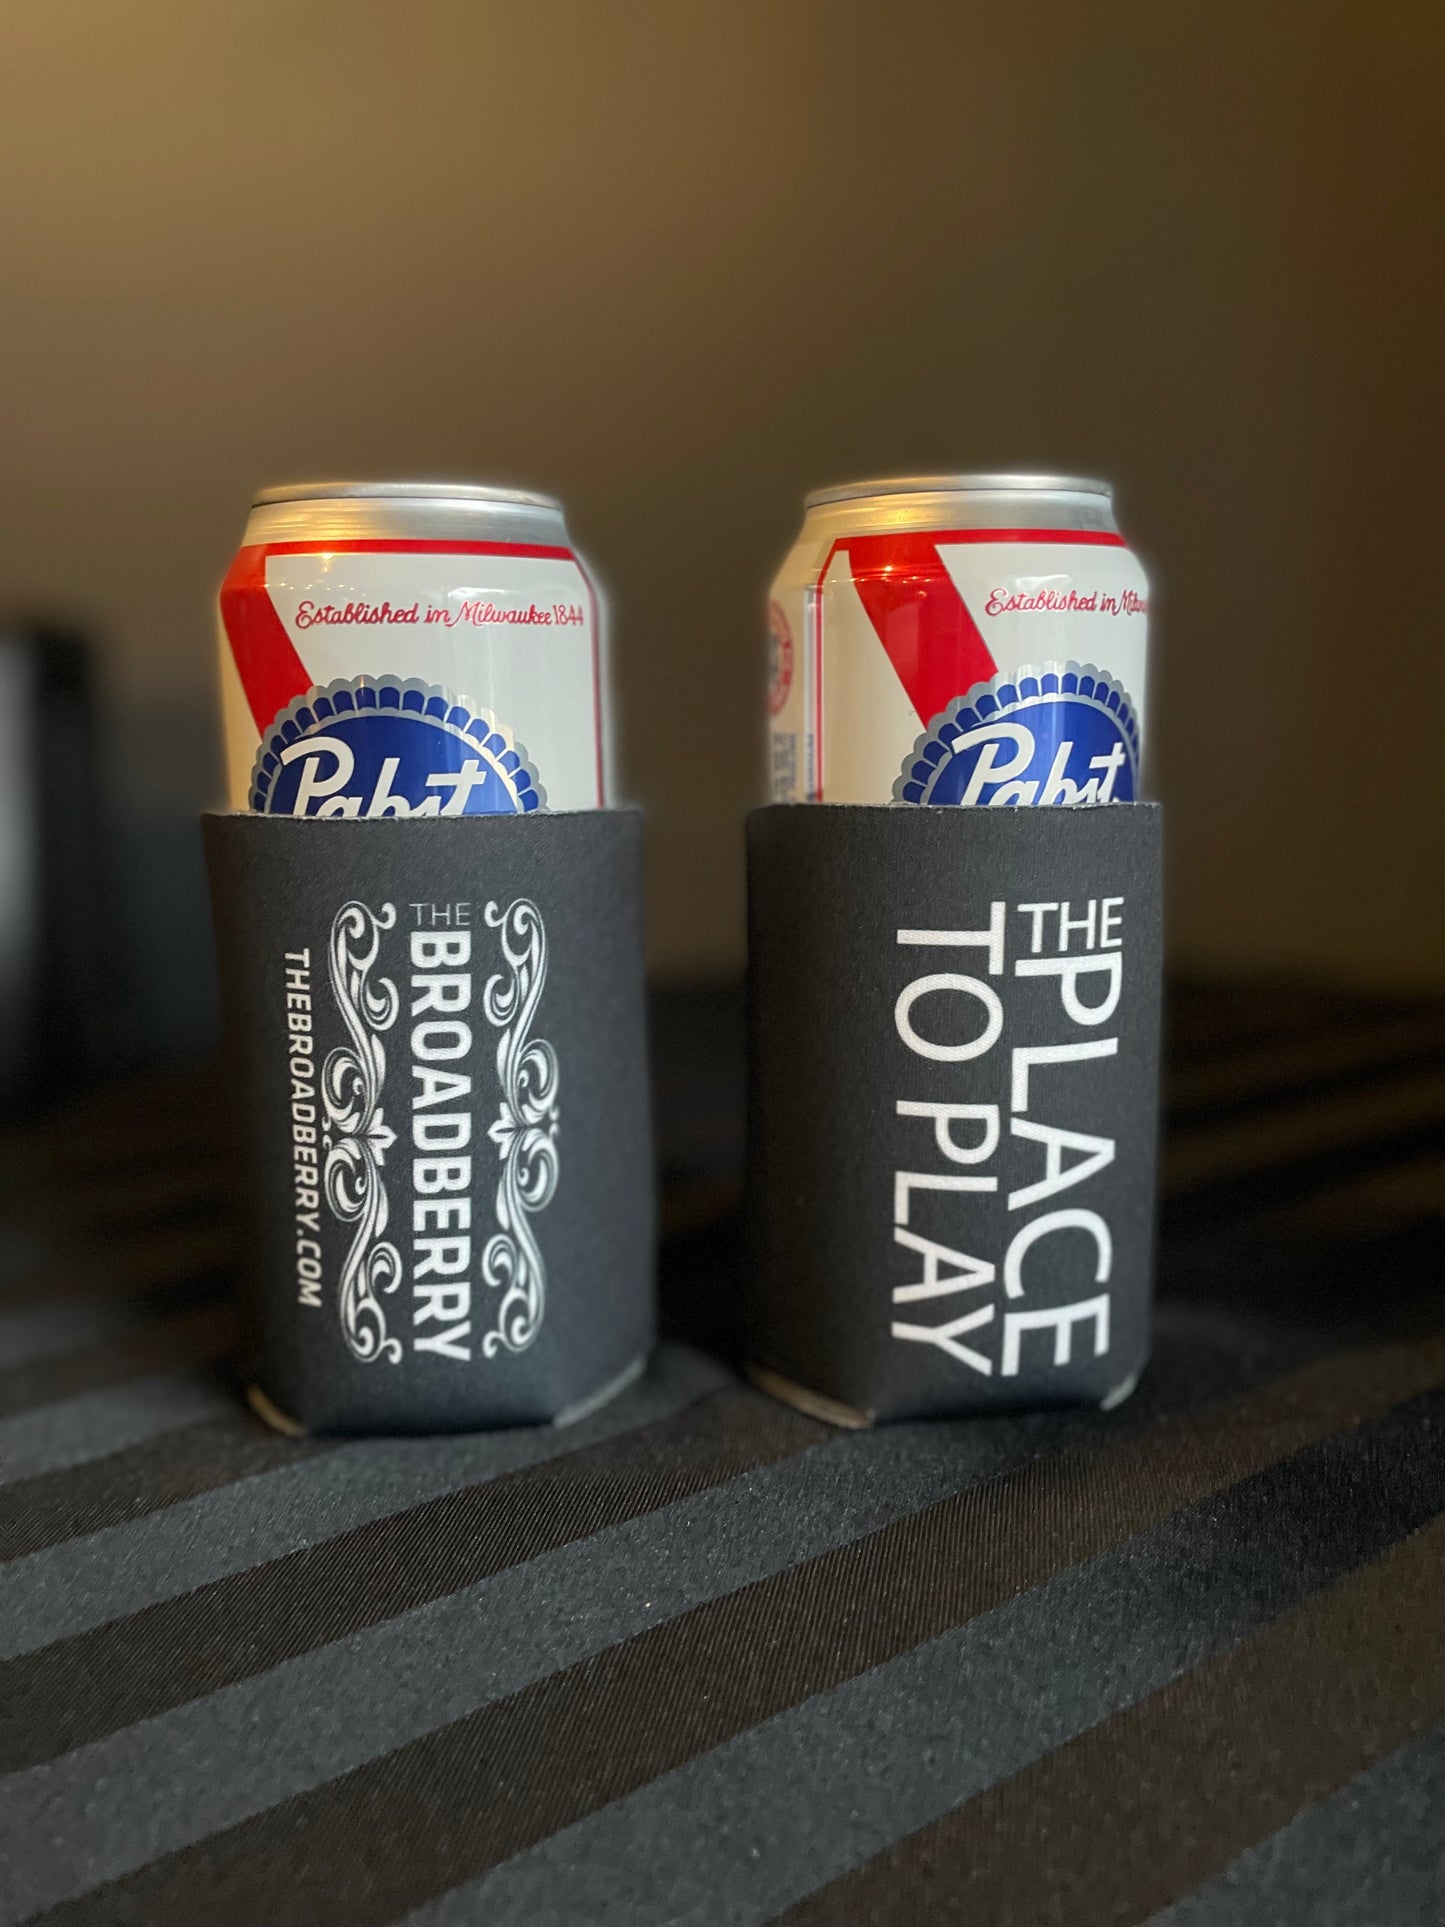 Broadberry Coozie